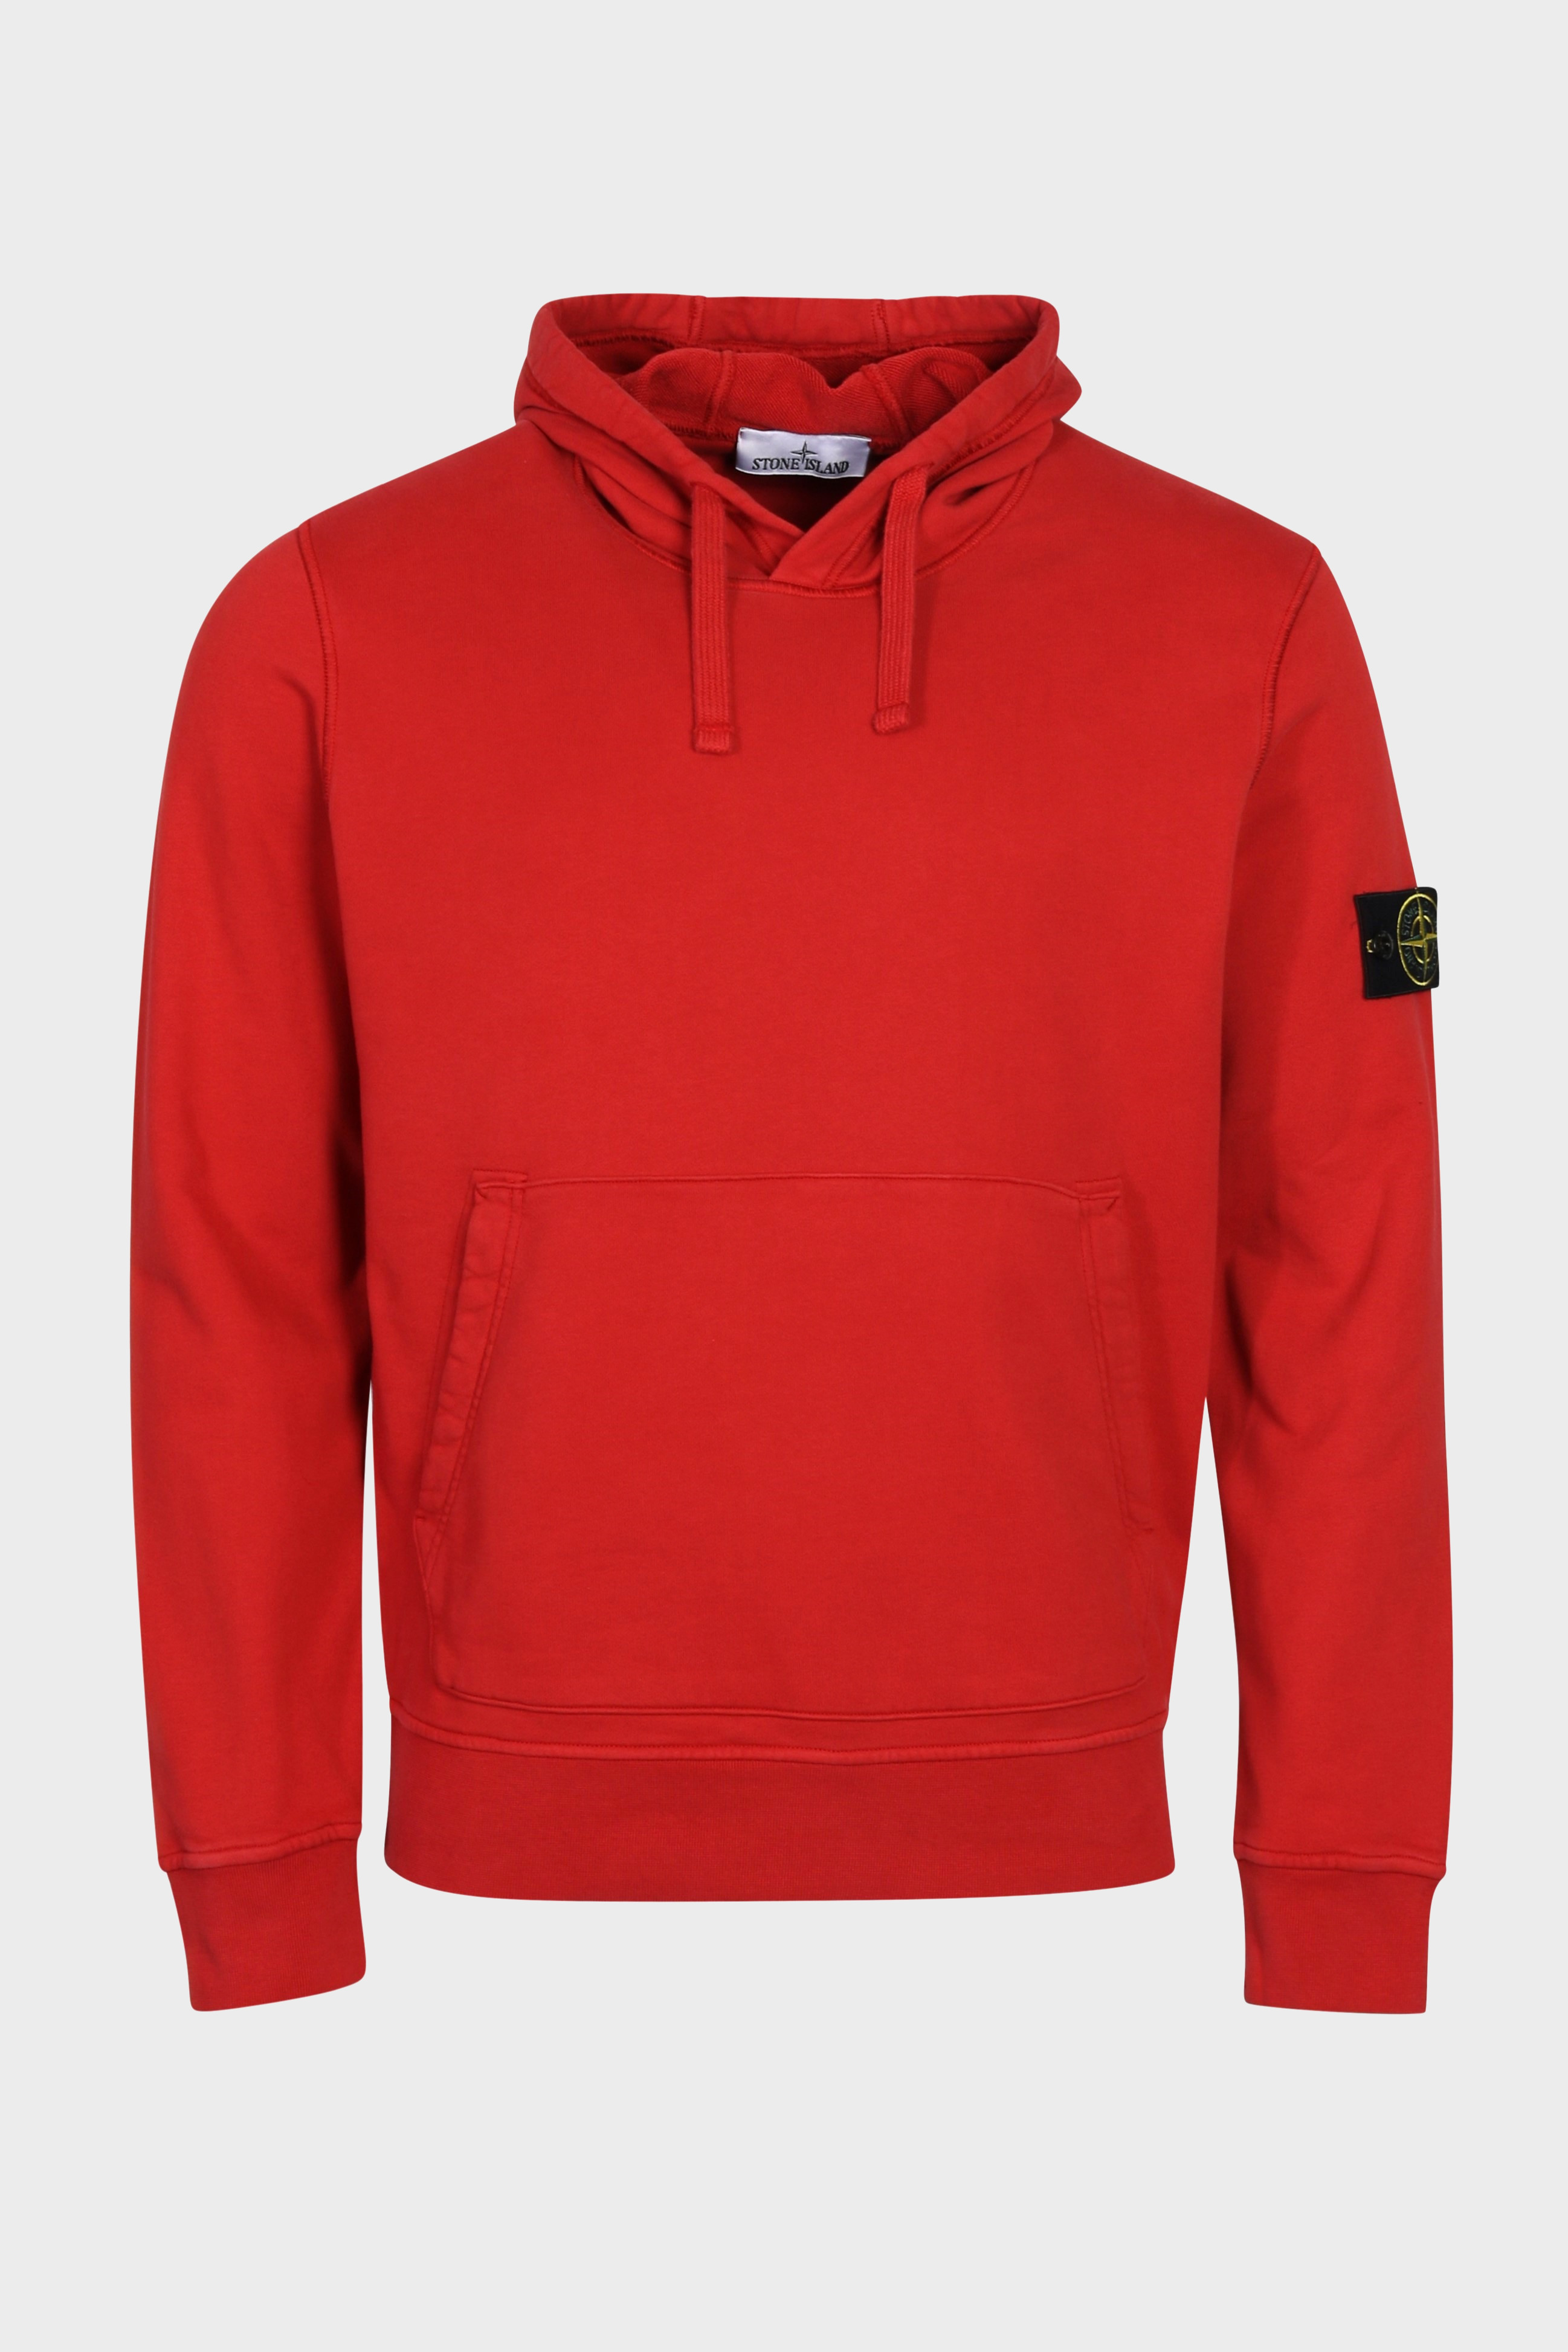 STONE ISLAND Sweat Hoodie in Red 3XL